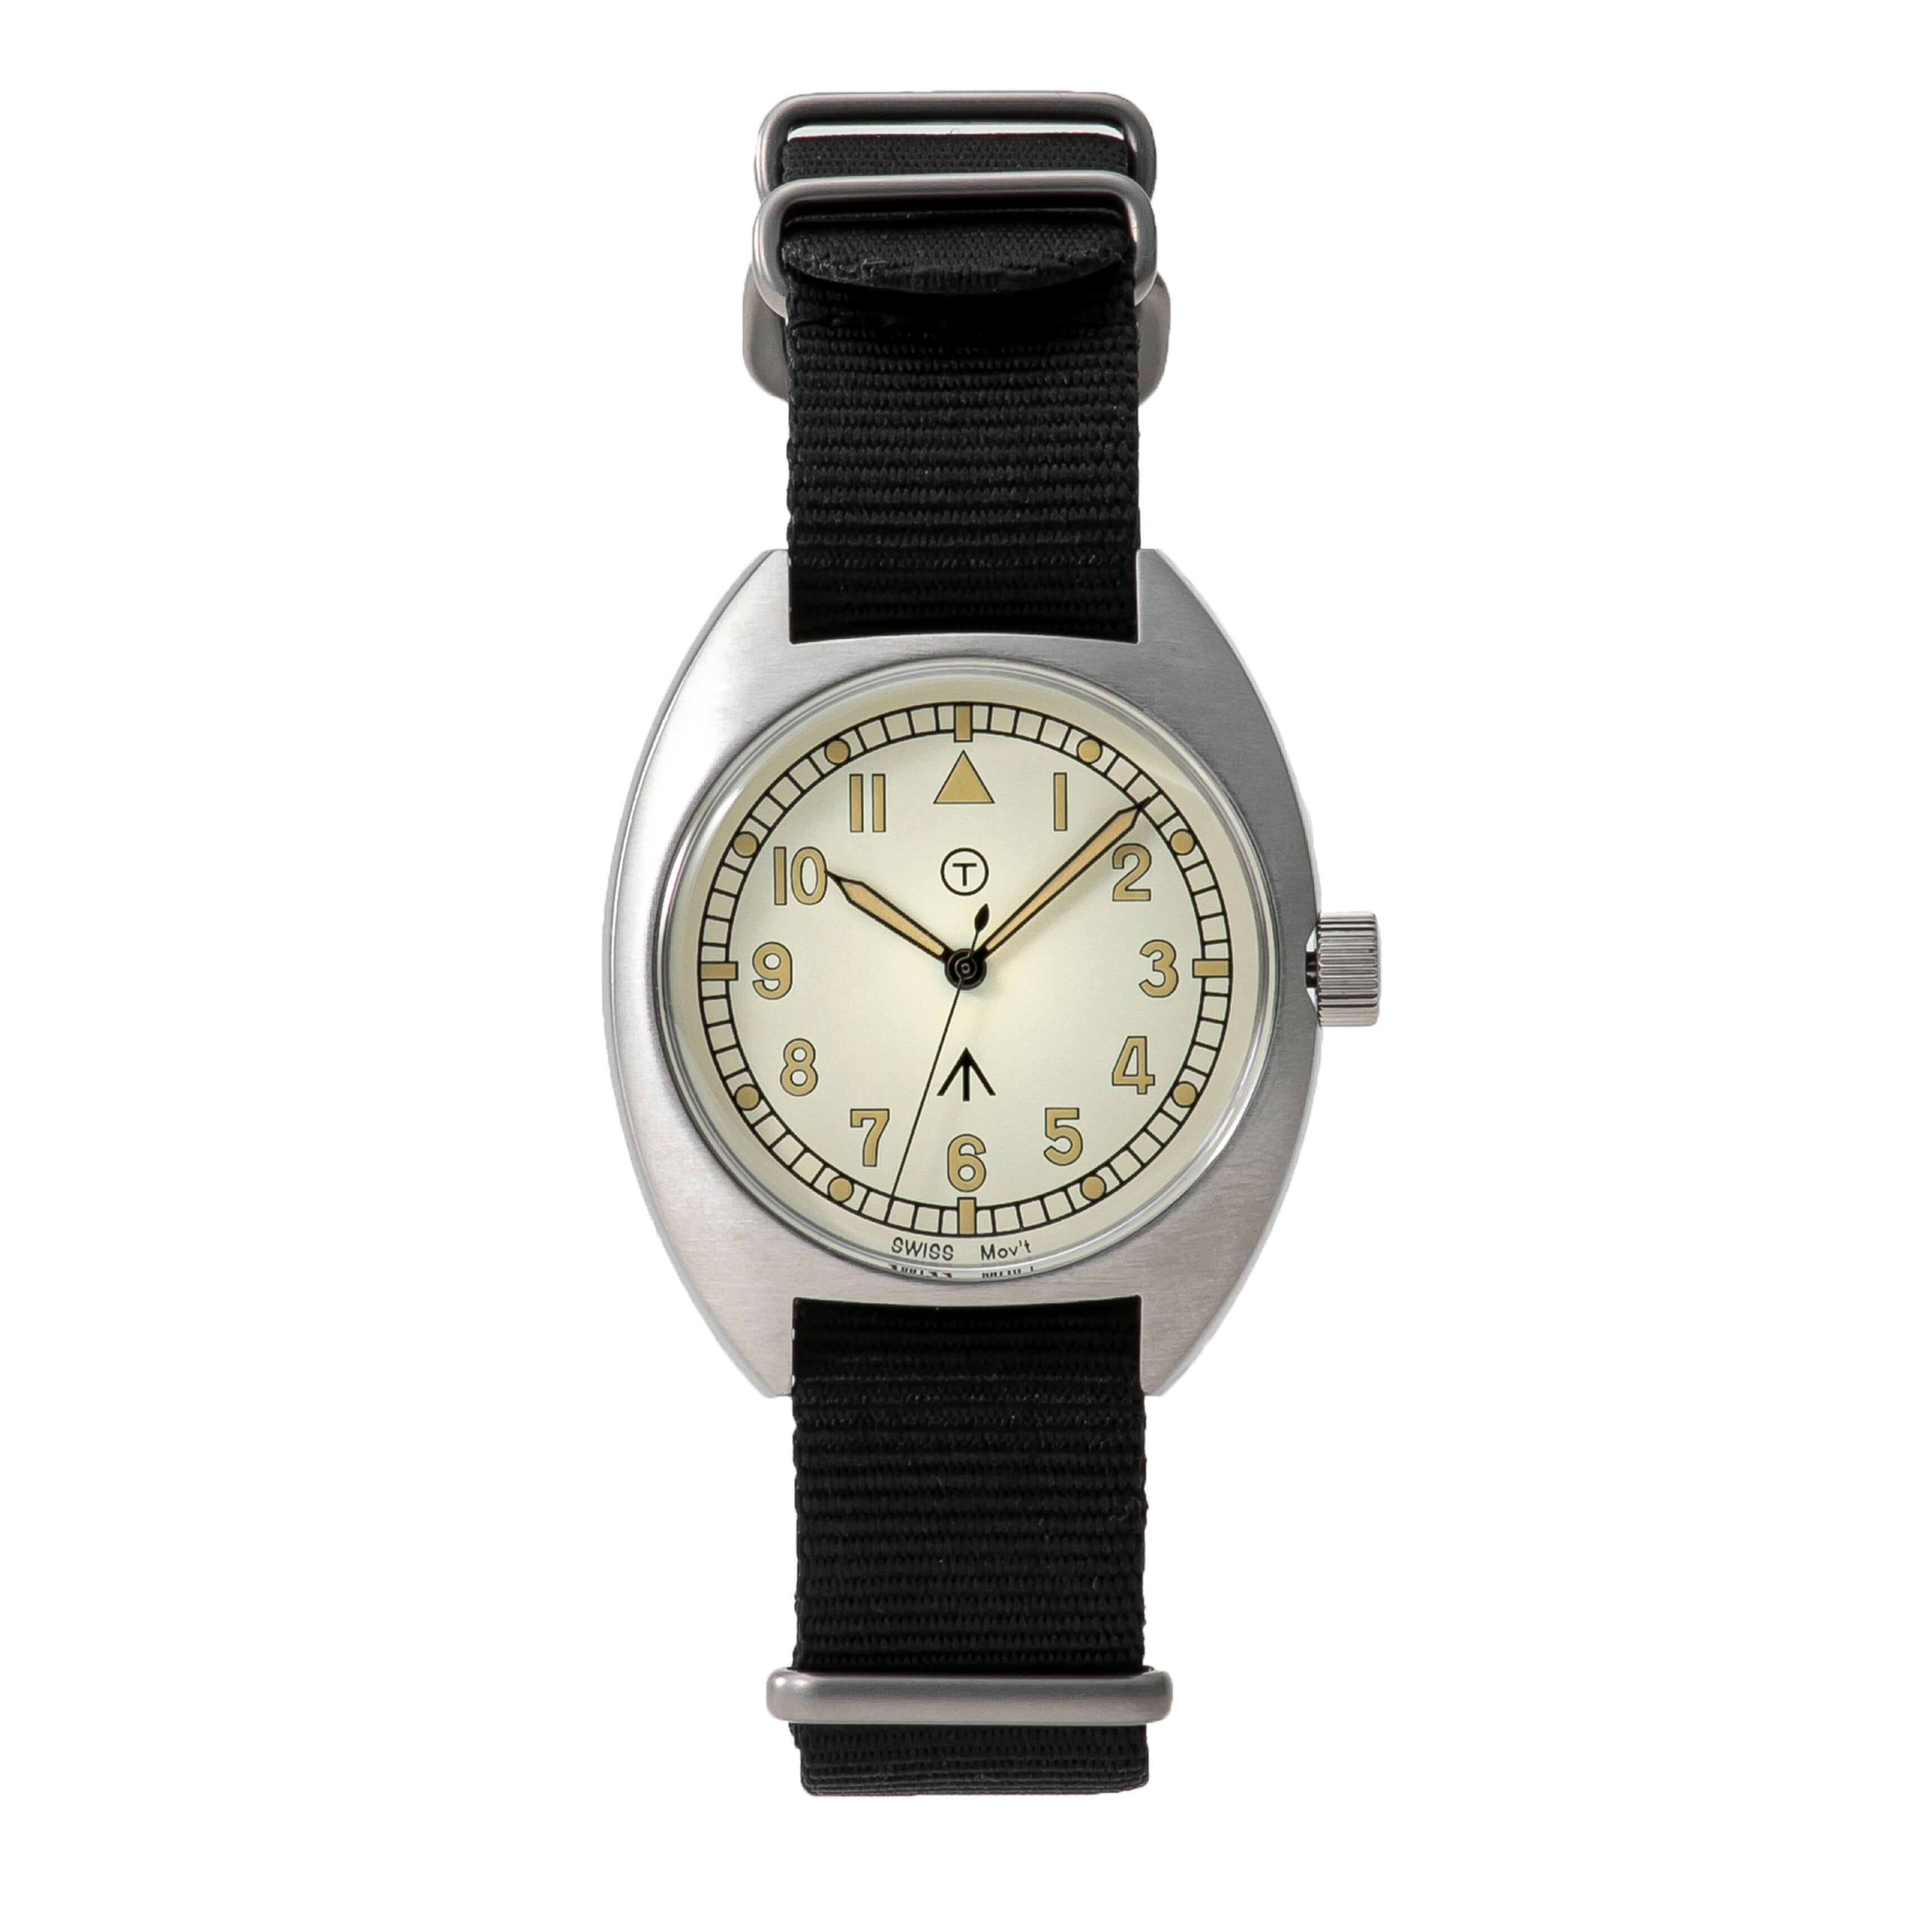 Naval military watch Mil.-02C Royal Air Force type